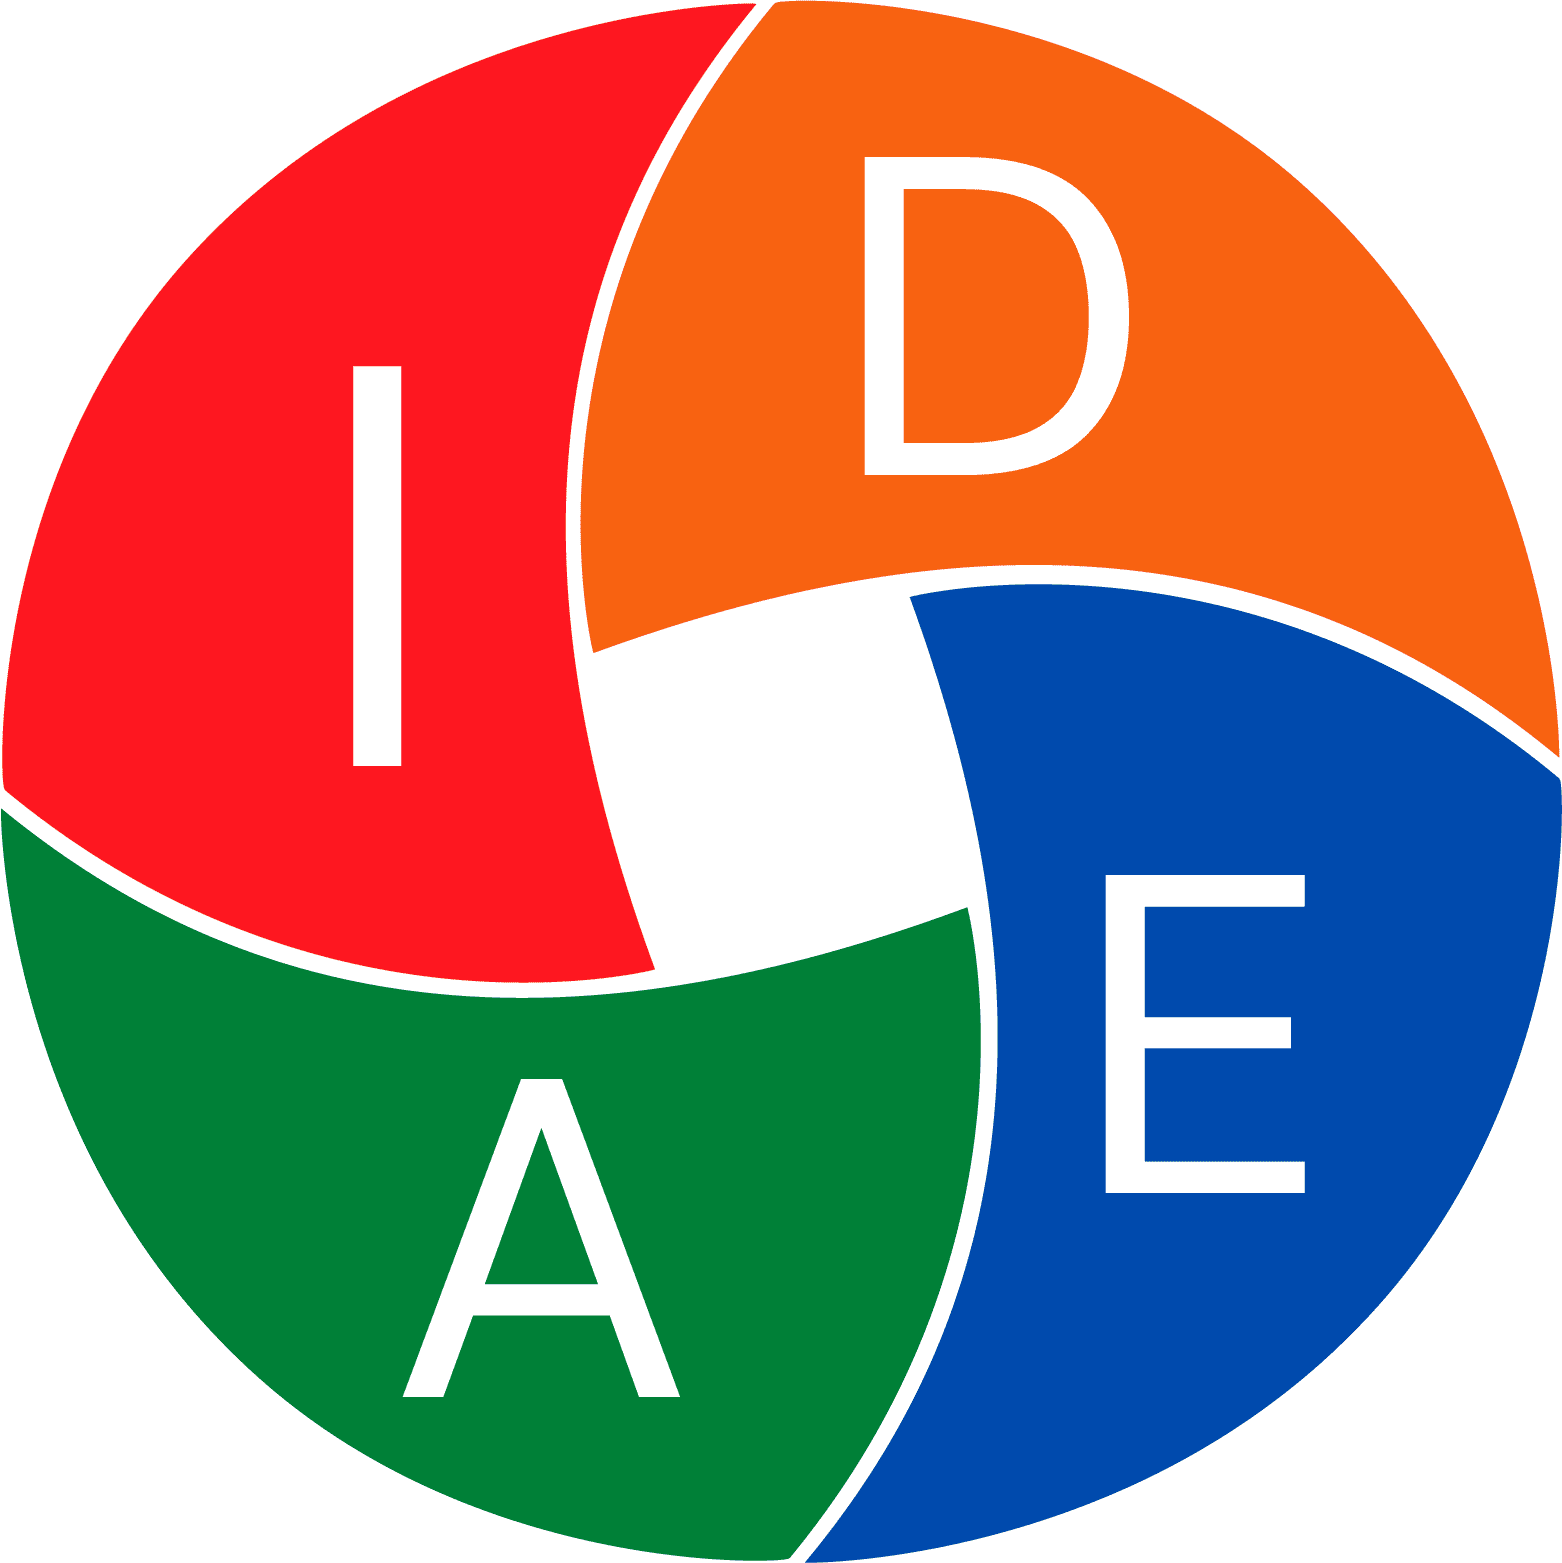 Squares with the word IDEA. One square for each initial of the four letters of IDEA. I in a red square, D in an orange square, E in a blue square and A in a green square.